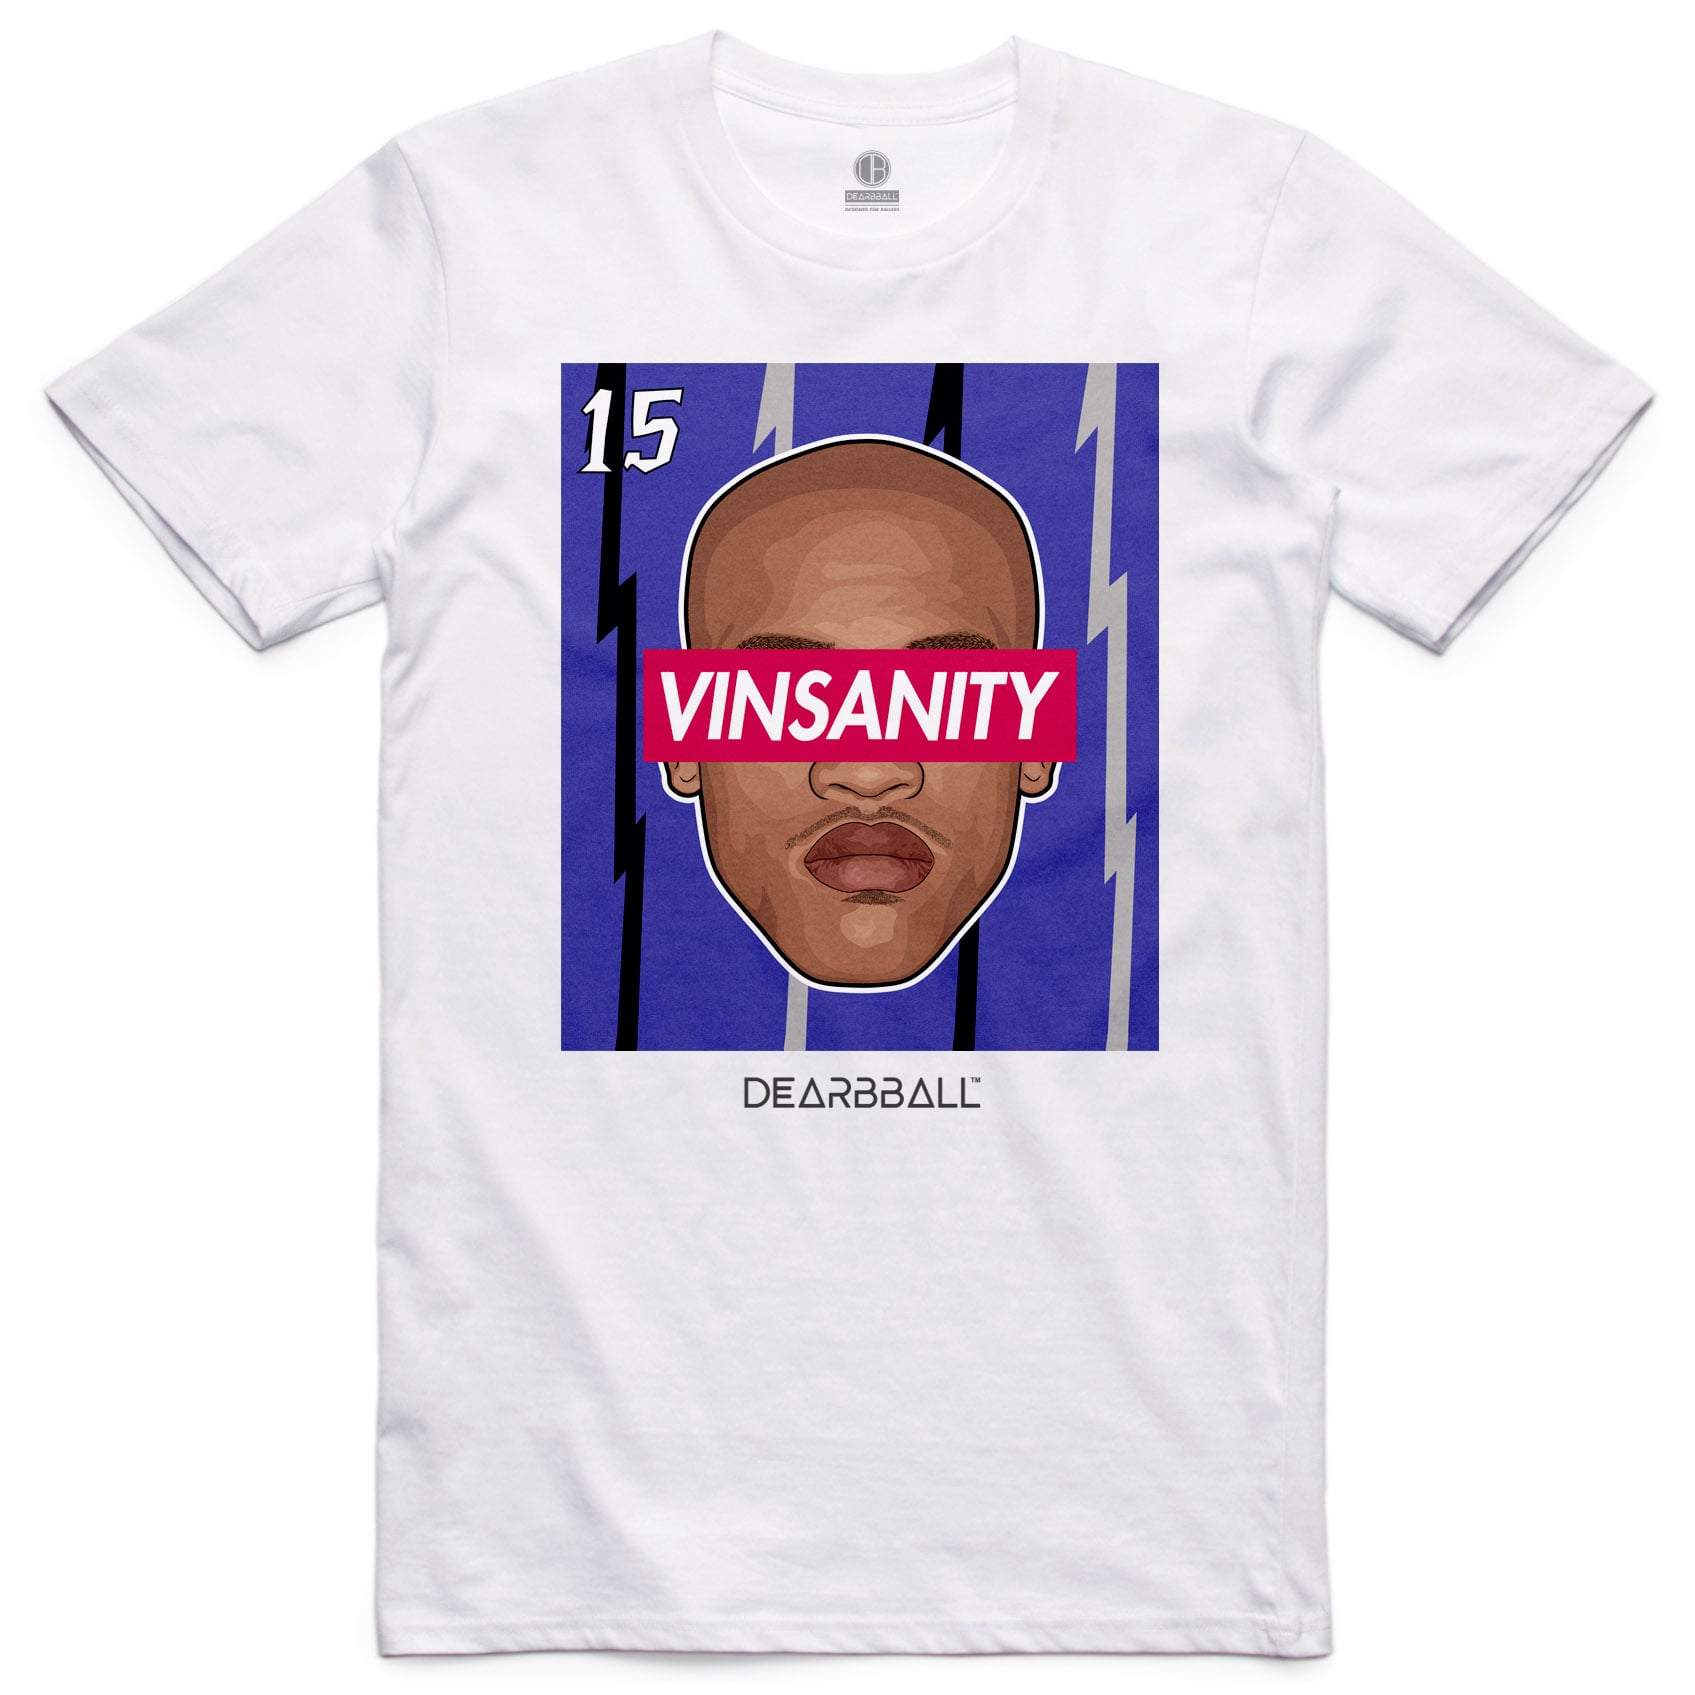 DearBBall T-Shirt - VINSANITY Red Edition